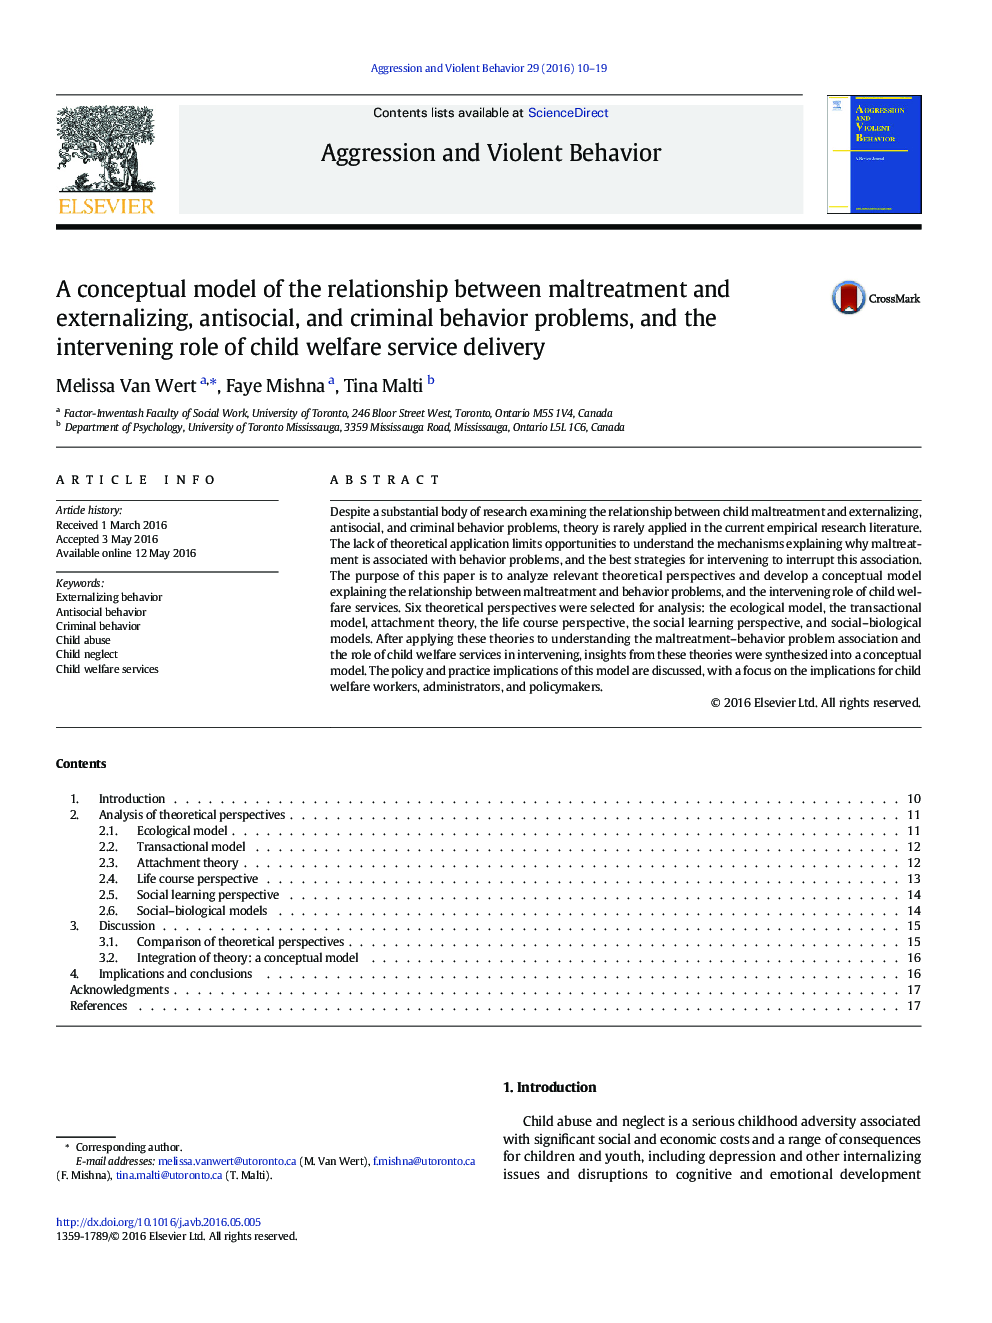 A conceptual model of the relationship between maltreatment and externalizing, antisocial, and criminal behavior problems, and the intervening role of child welfare service delivery